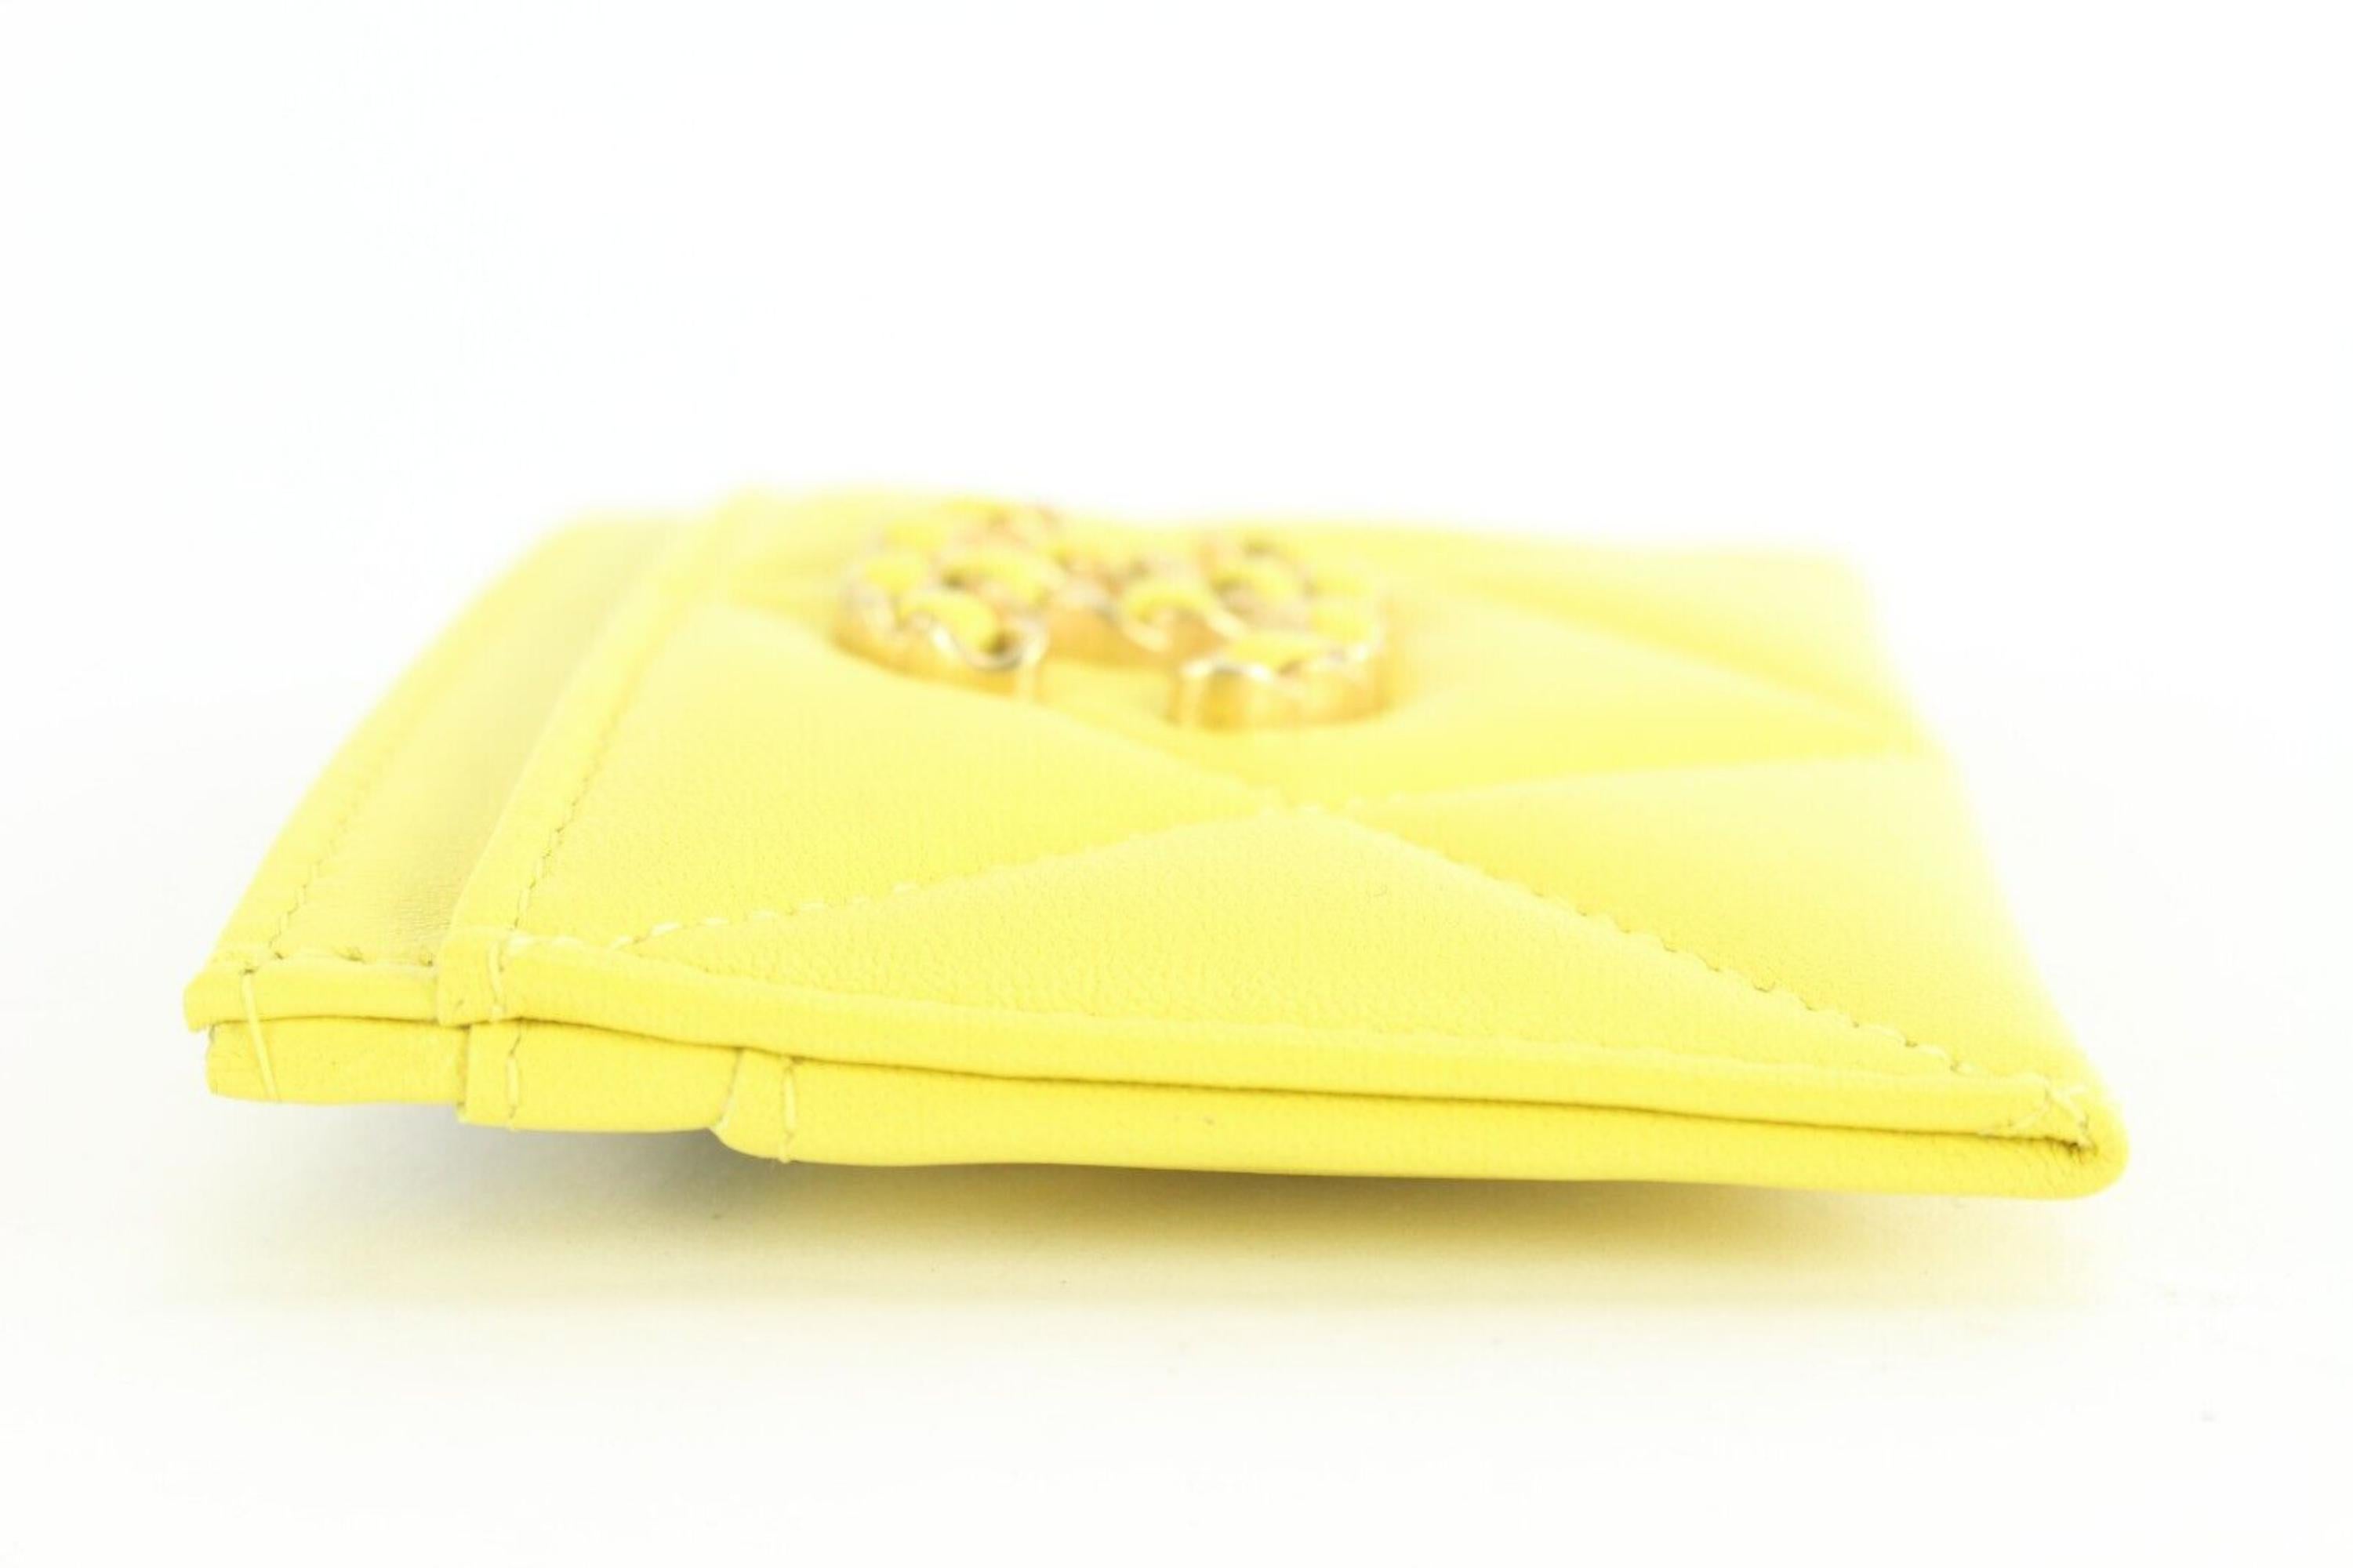 Chanel 2023 Rare Bright Yellow Leather 19 Card Holder 1CC55a 5